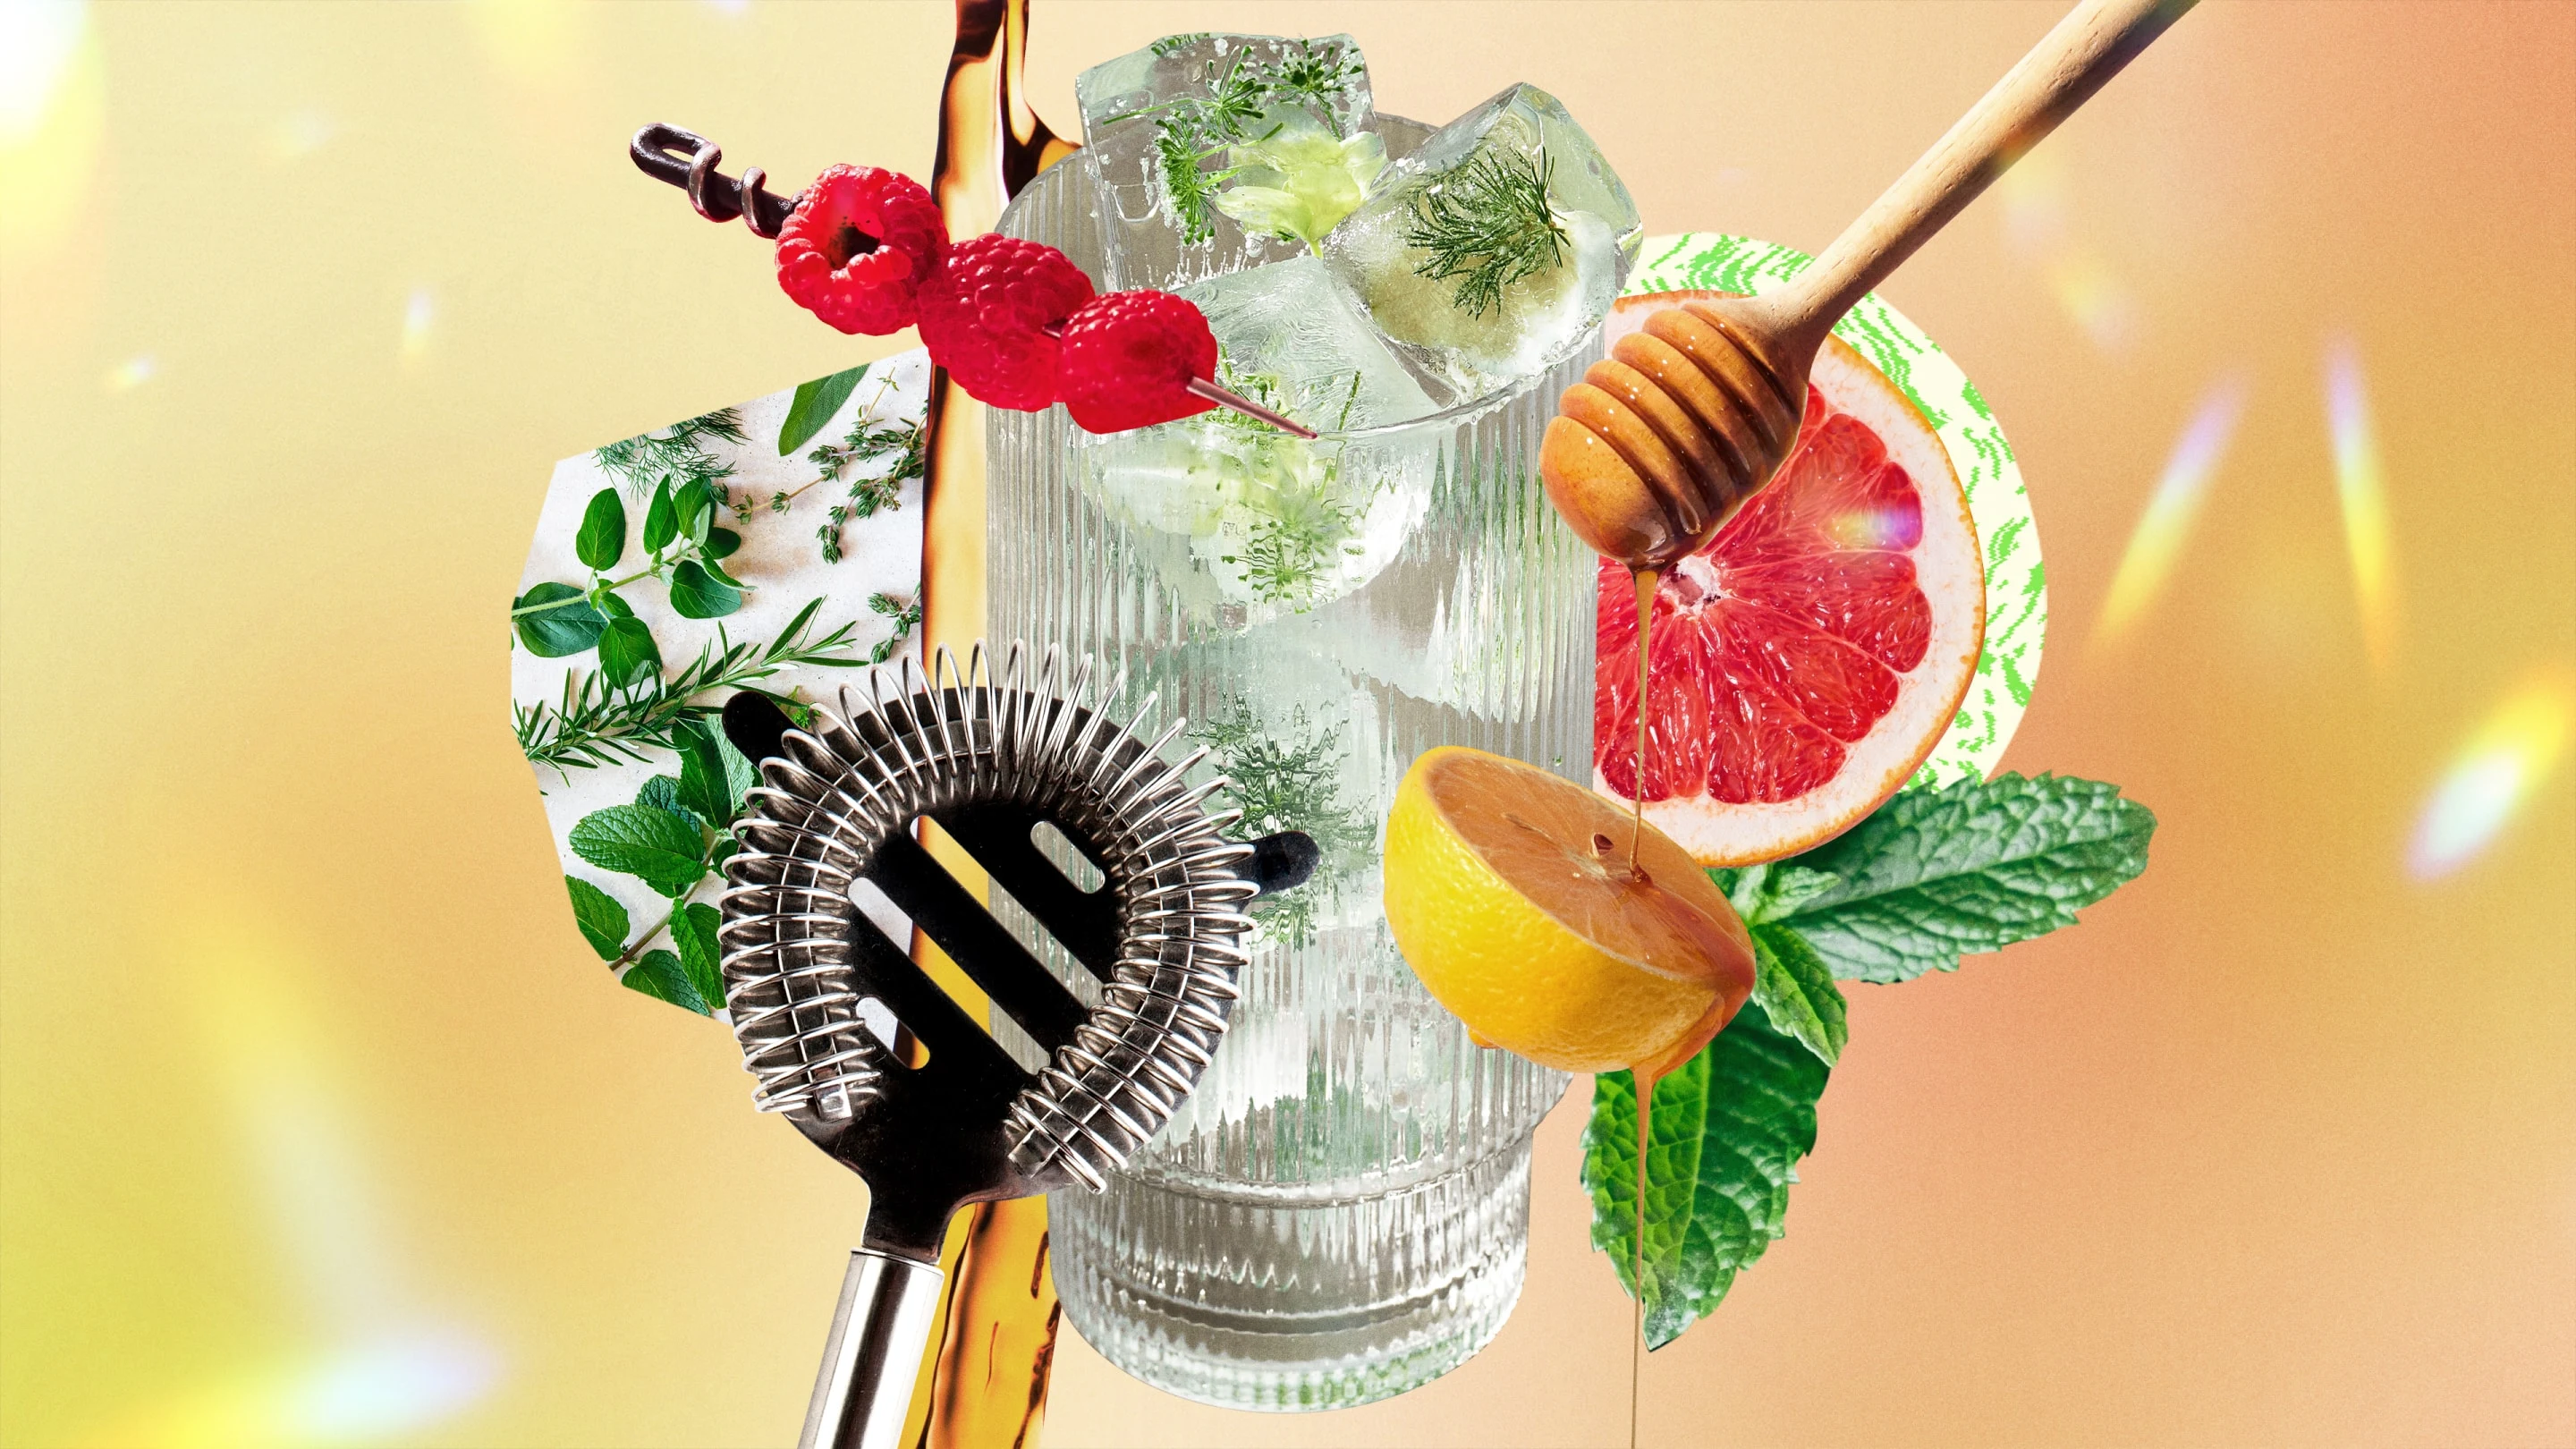 Collage featuring barware tools and a glass of ice cubes surrounded by a honey dipper pouring honey on a lemon slice, a slice of grapefuit and various herb garnishes.